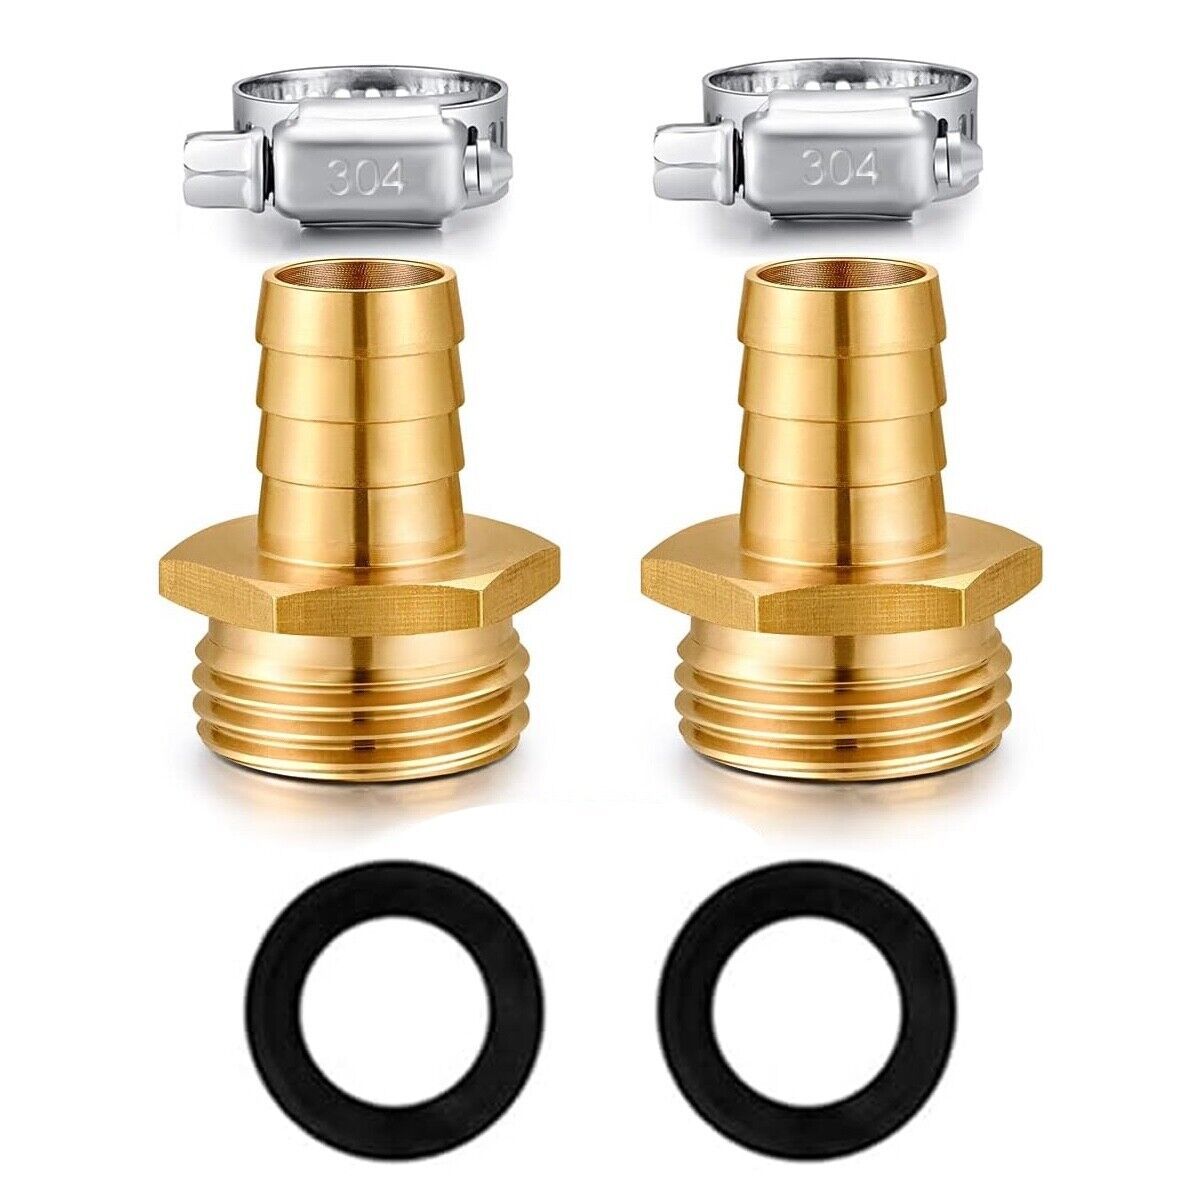 Primary image for 2PK GHT Repair Connector With Stainless Clamps 5/8" Barb X 3/4"Male Thread